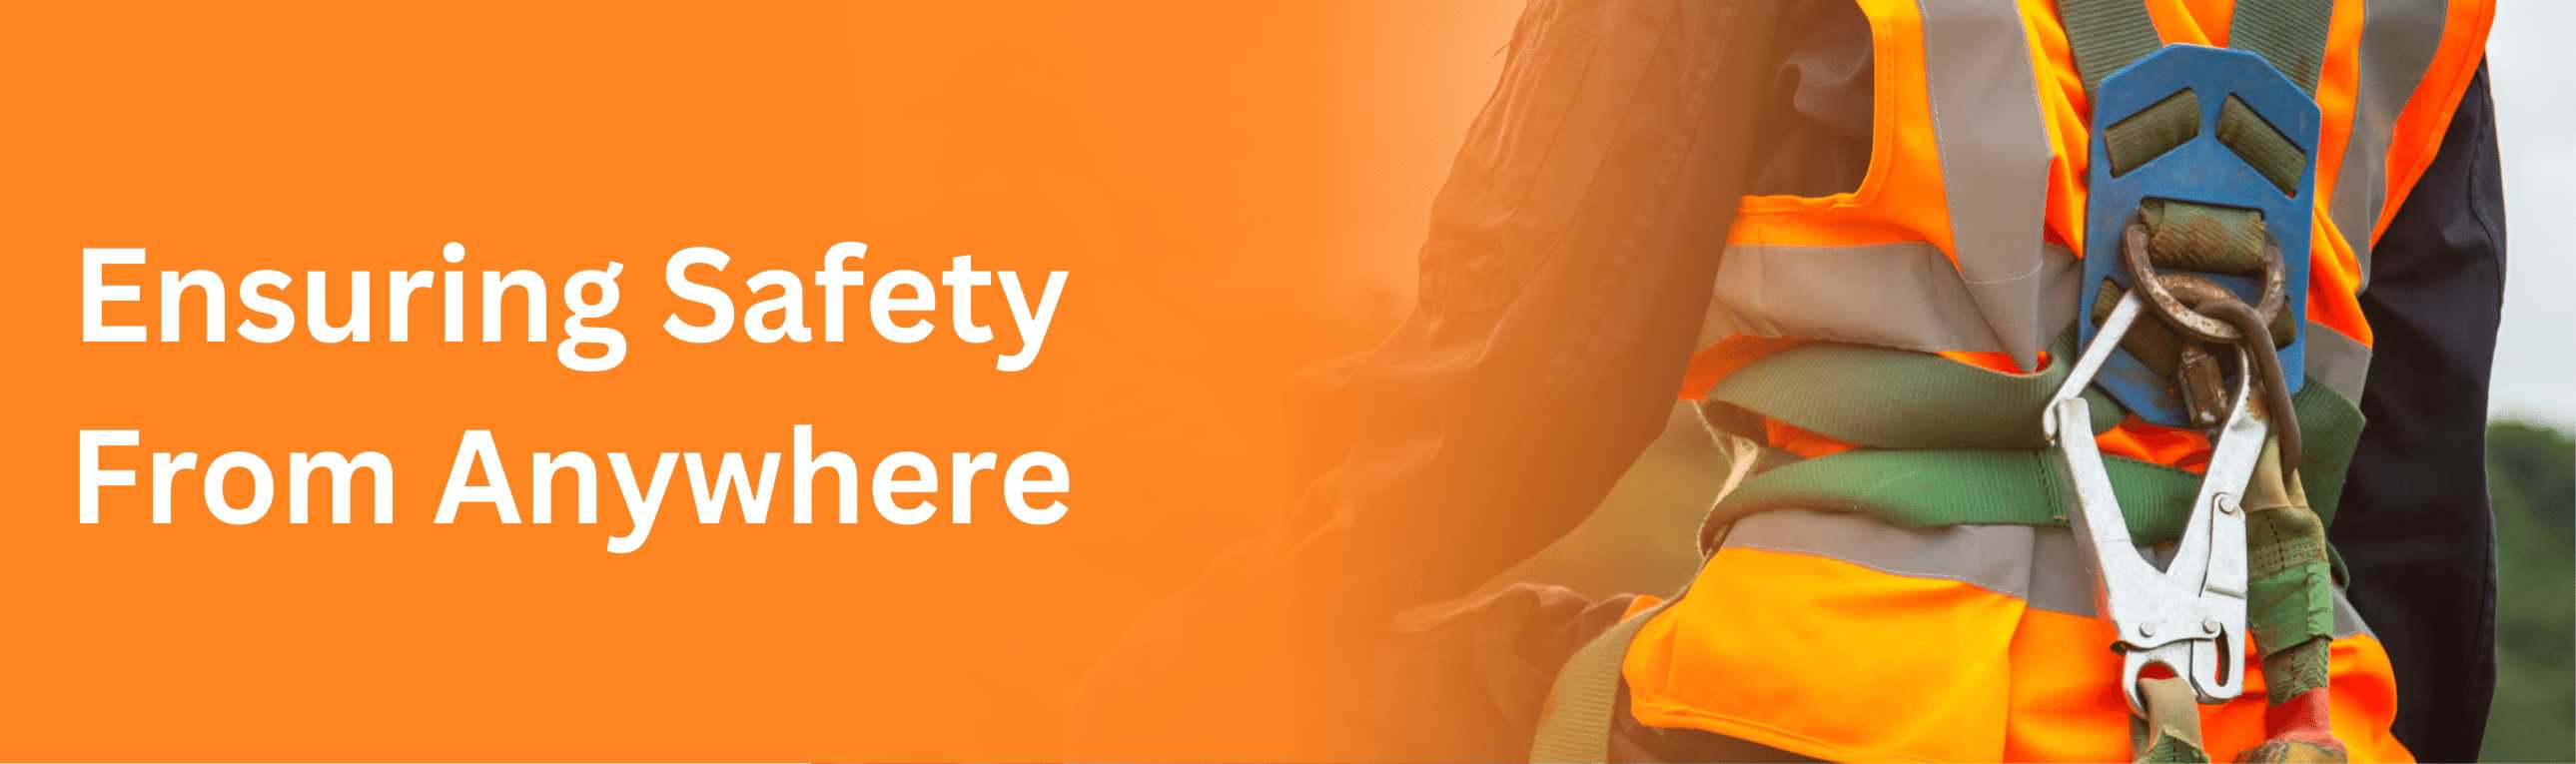 Fall Protection Training Online: Ensuring Safety from Anywhere